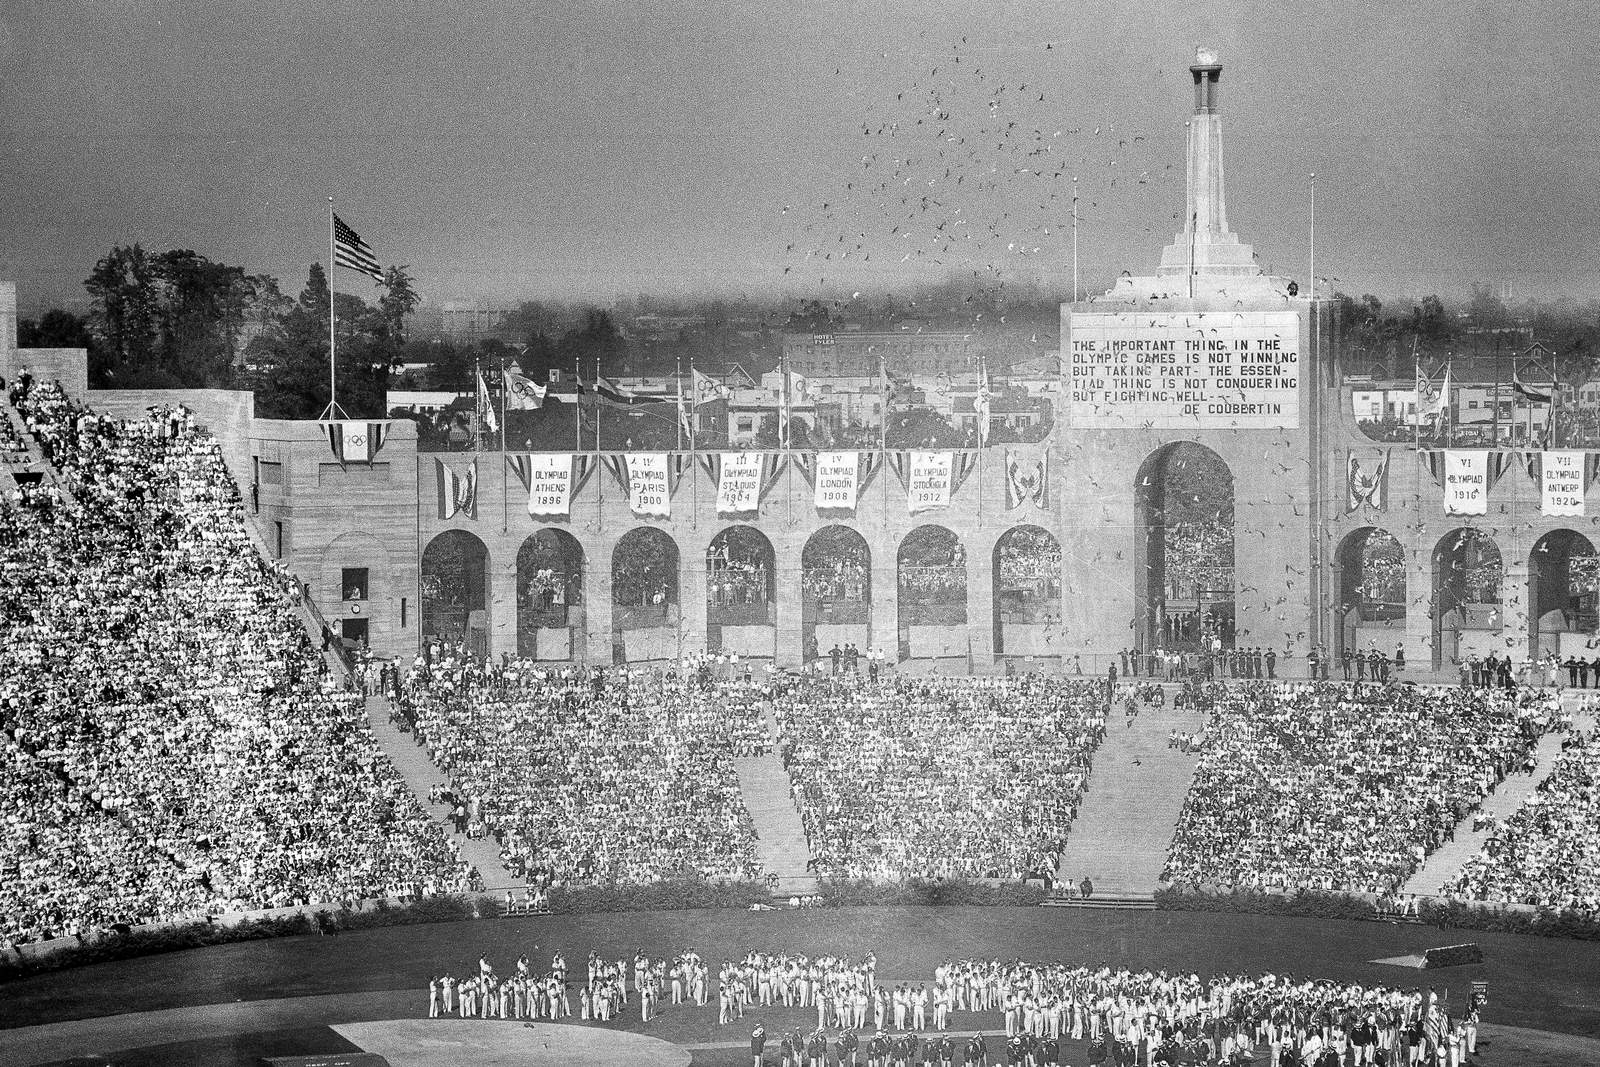 Los Angeles' first Olympics set template for future Games